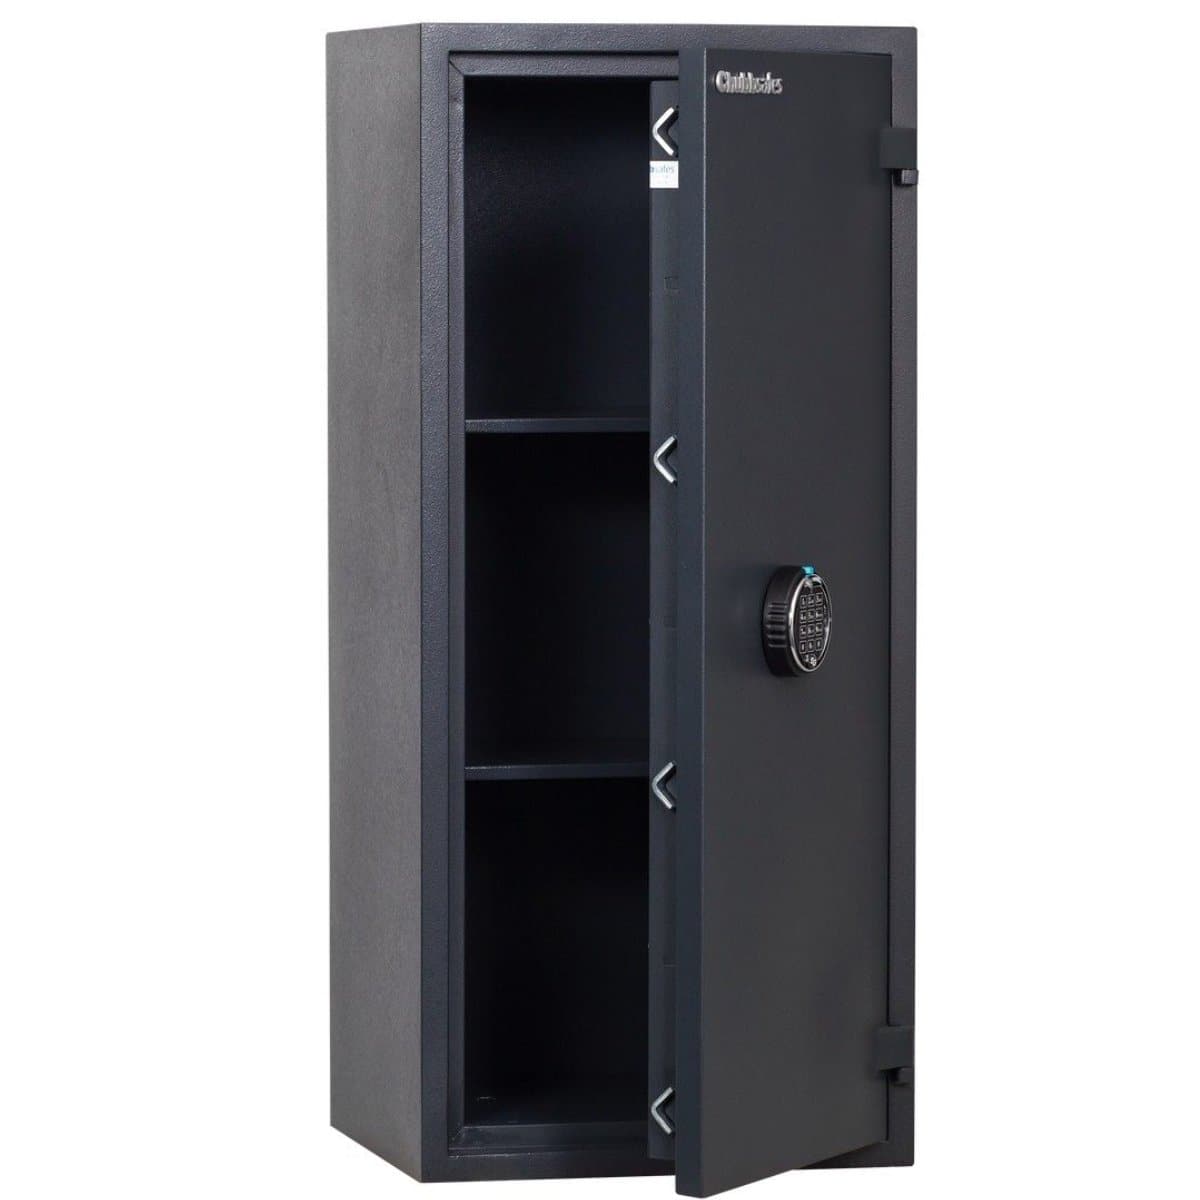 Chubbsafes HOME 90 Fire & Burglary Protection Safe 91L, Digital, Anthracite